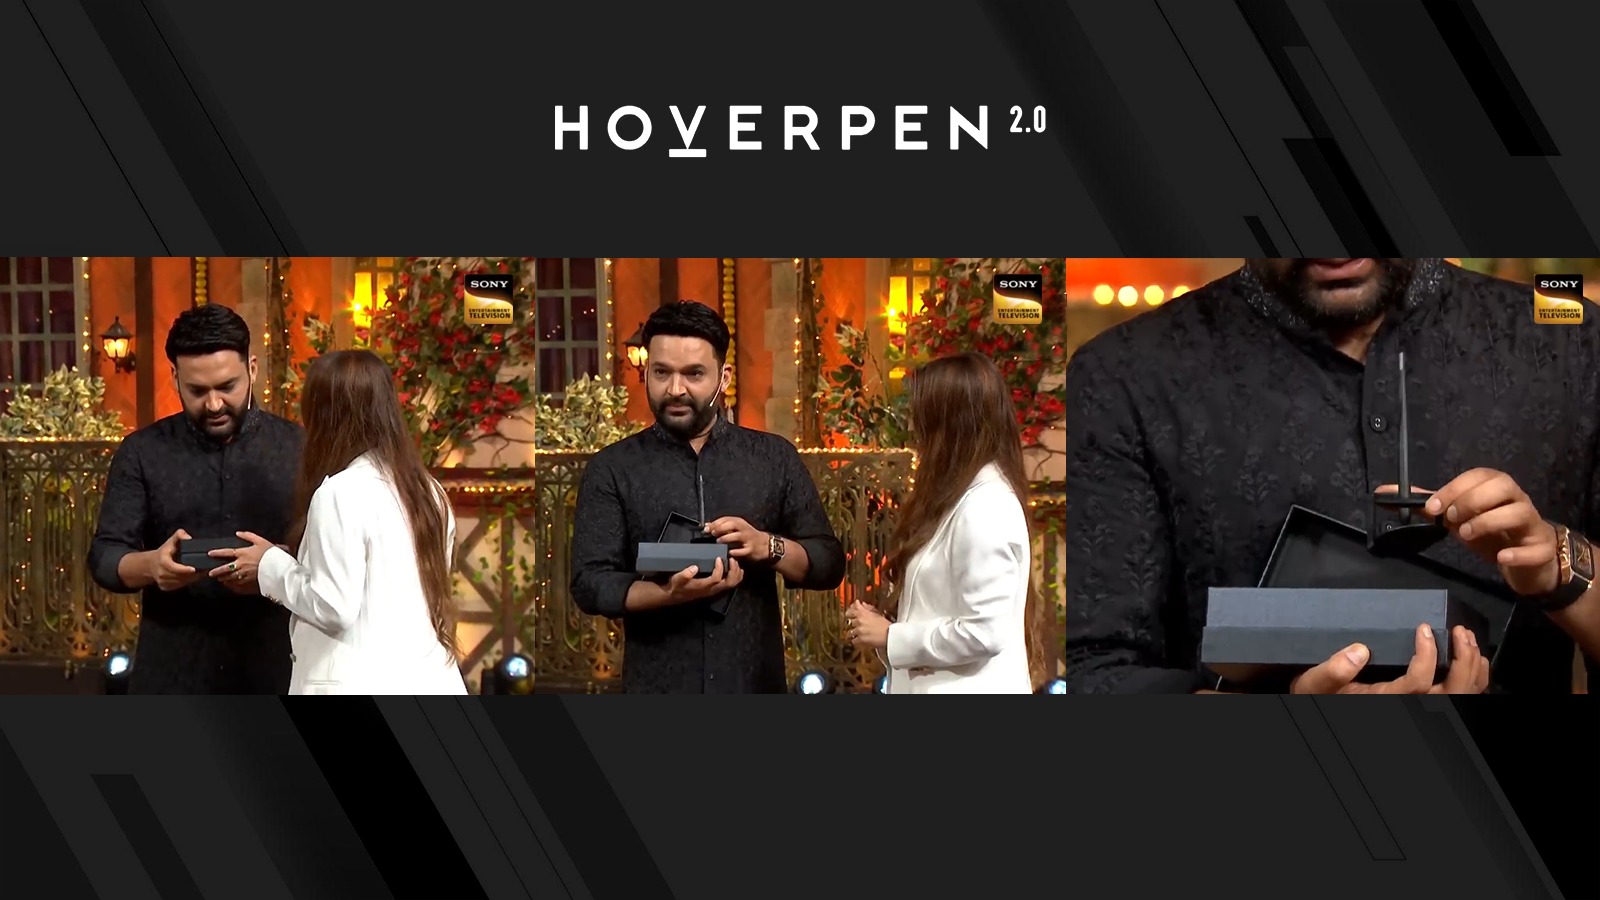 Hoverpen was given to Kapil